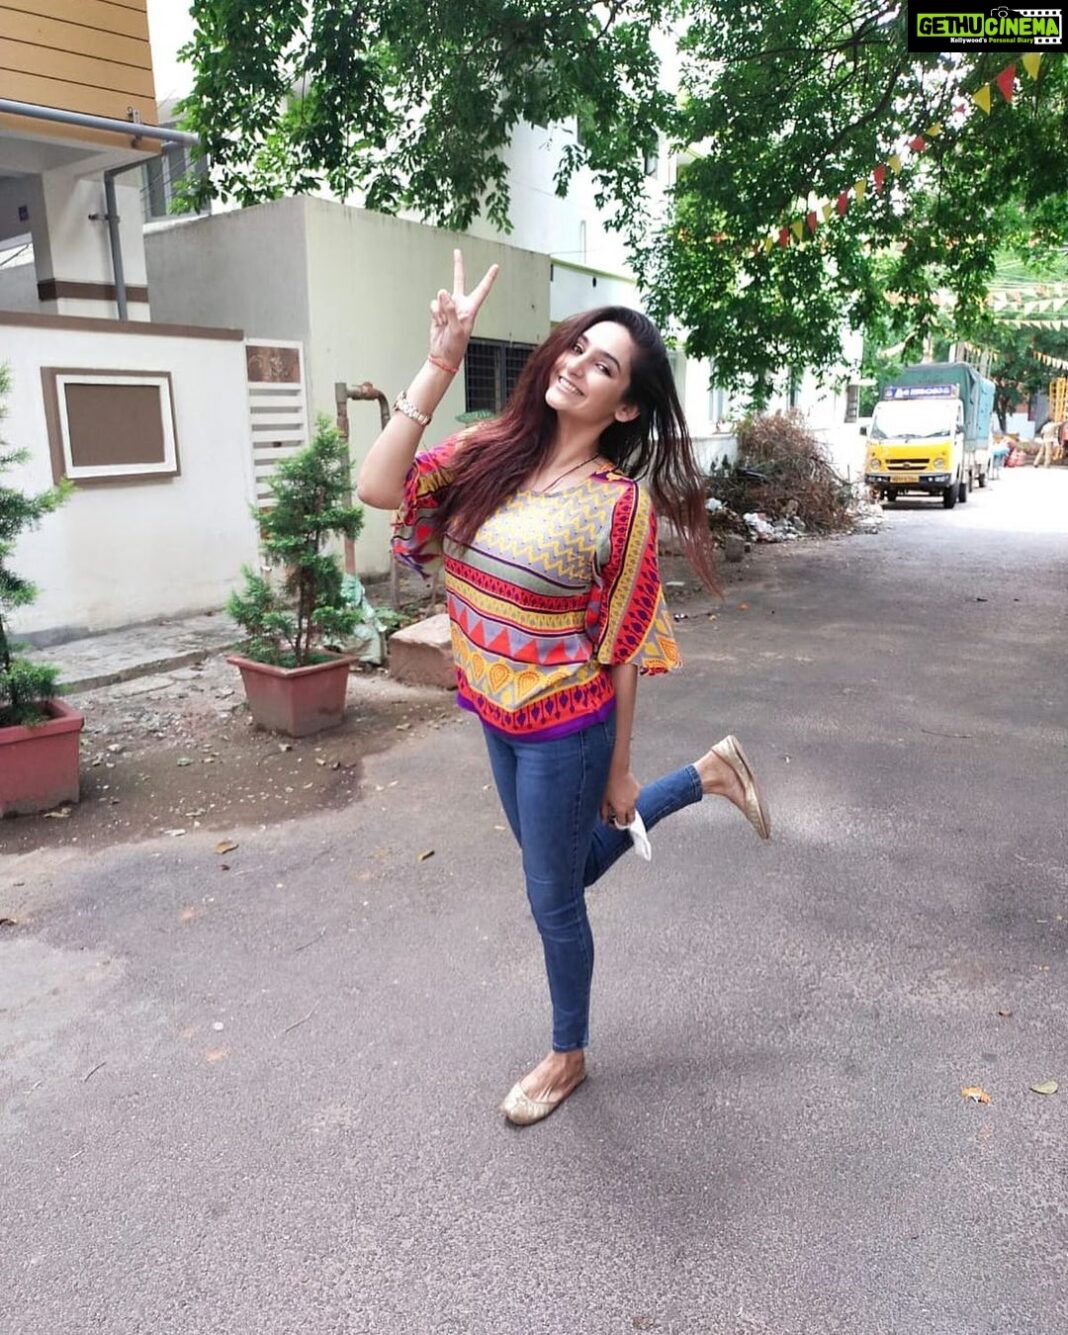 Ragini Dwivedi Instagram - Here’s a mid week smiley picture to cheer you up and tell you the discharges have begun to show great numbers all over Karnataka over 60000 people discharged and 40 000 in Bengaluru and we are on our way to beat corona :) A huge shout out to all the frontline volunteers from #Genexttrust and each one who has been working tirelessly to save each life or help each other pic by @vardhanblore #betterdaysarecoming #beatcorona #standtogether #positivevibes #karnatakafocus #raginidwivedi Bangalore, Karnataka